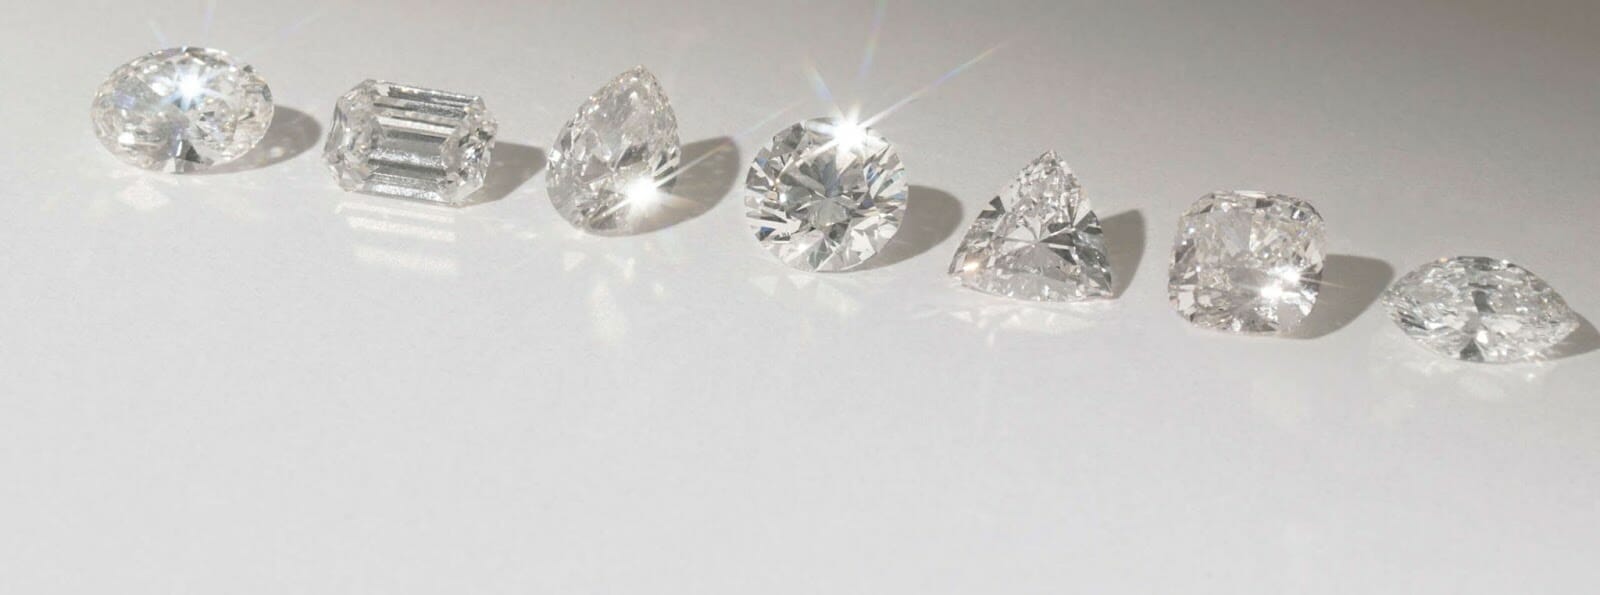 Multiple diamond shapes including - pear, emerald, round, heart cut diamonds, sitting on a white background